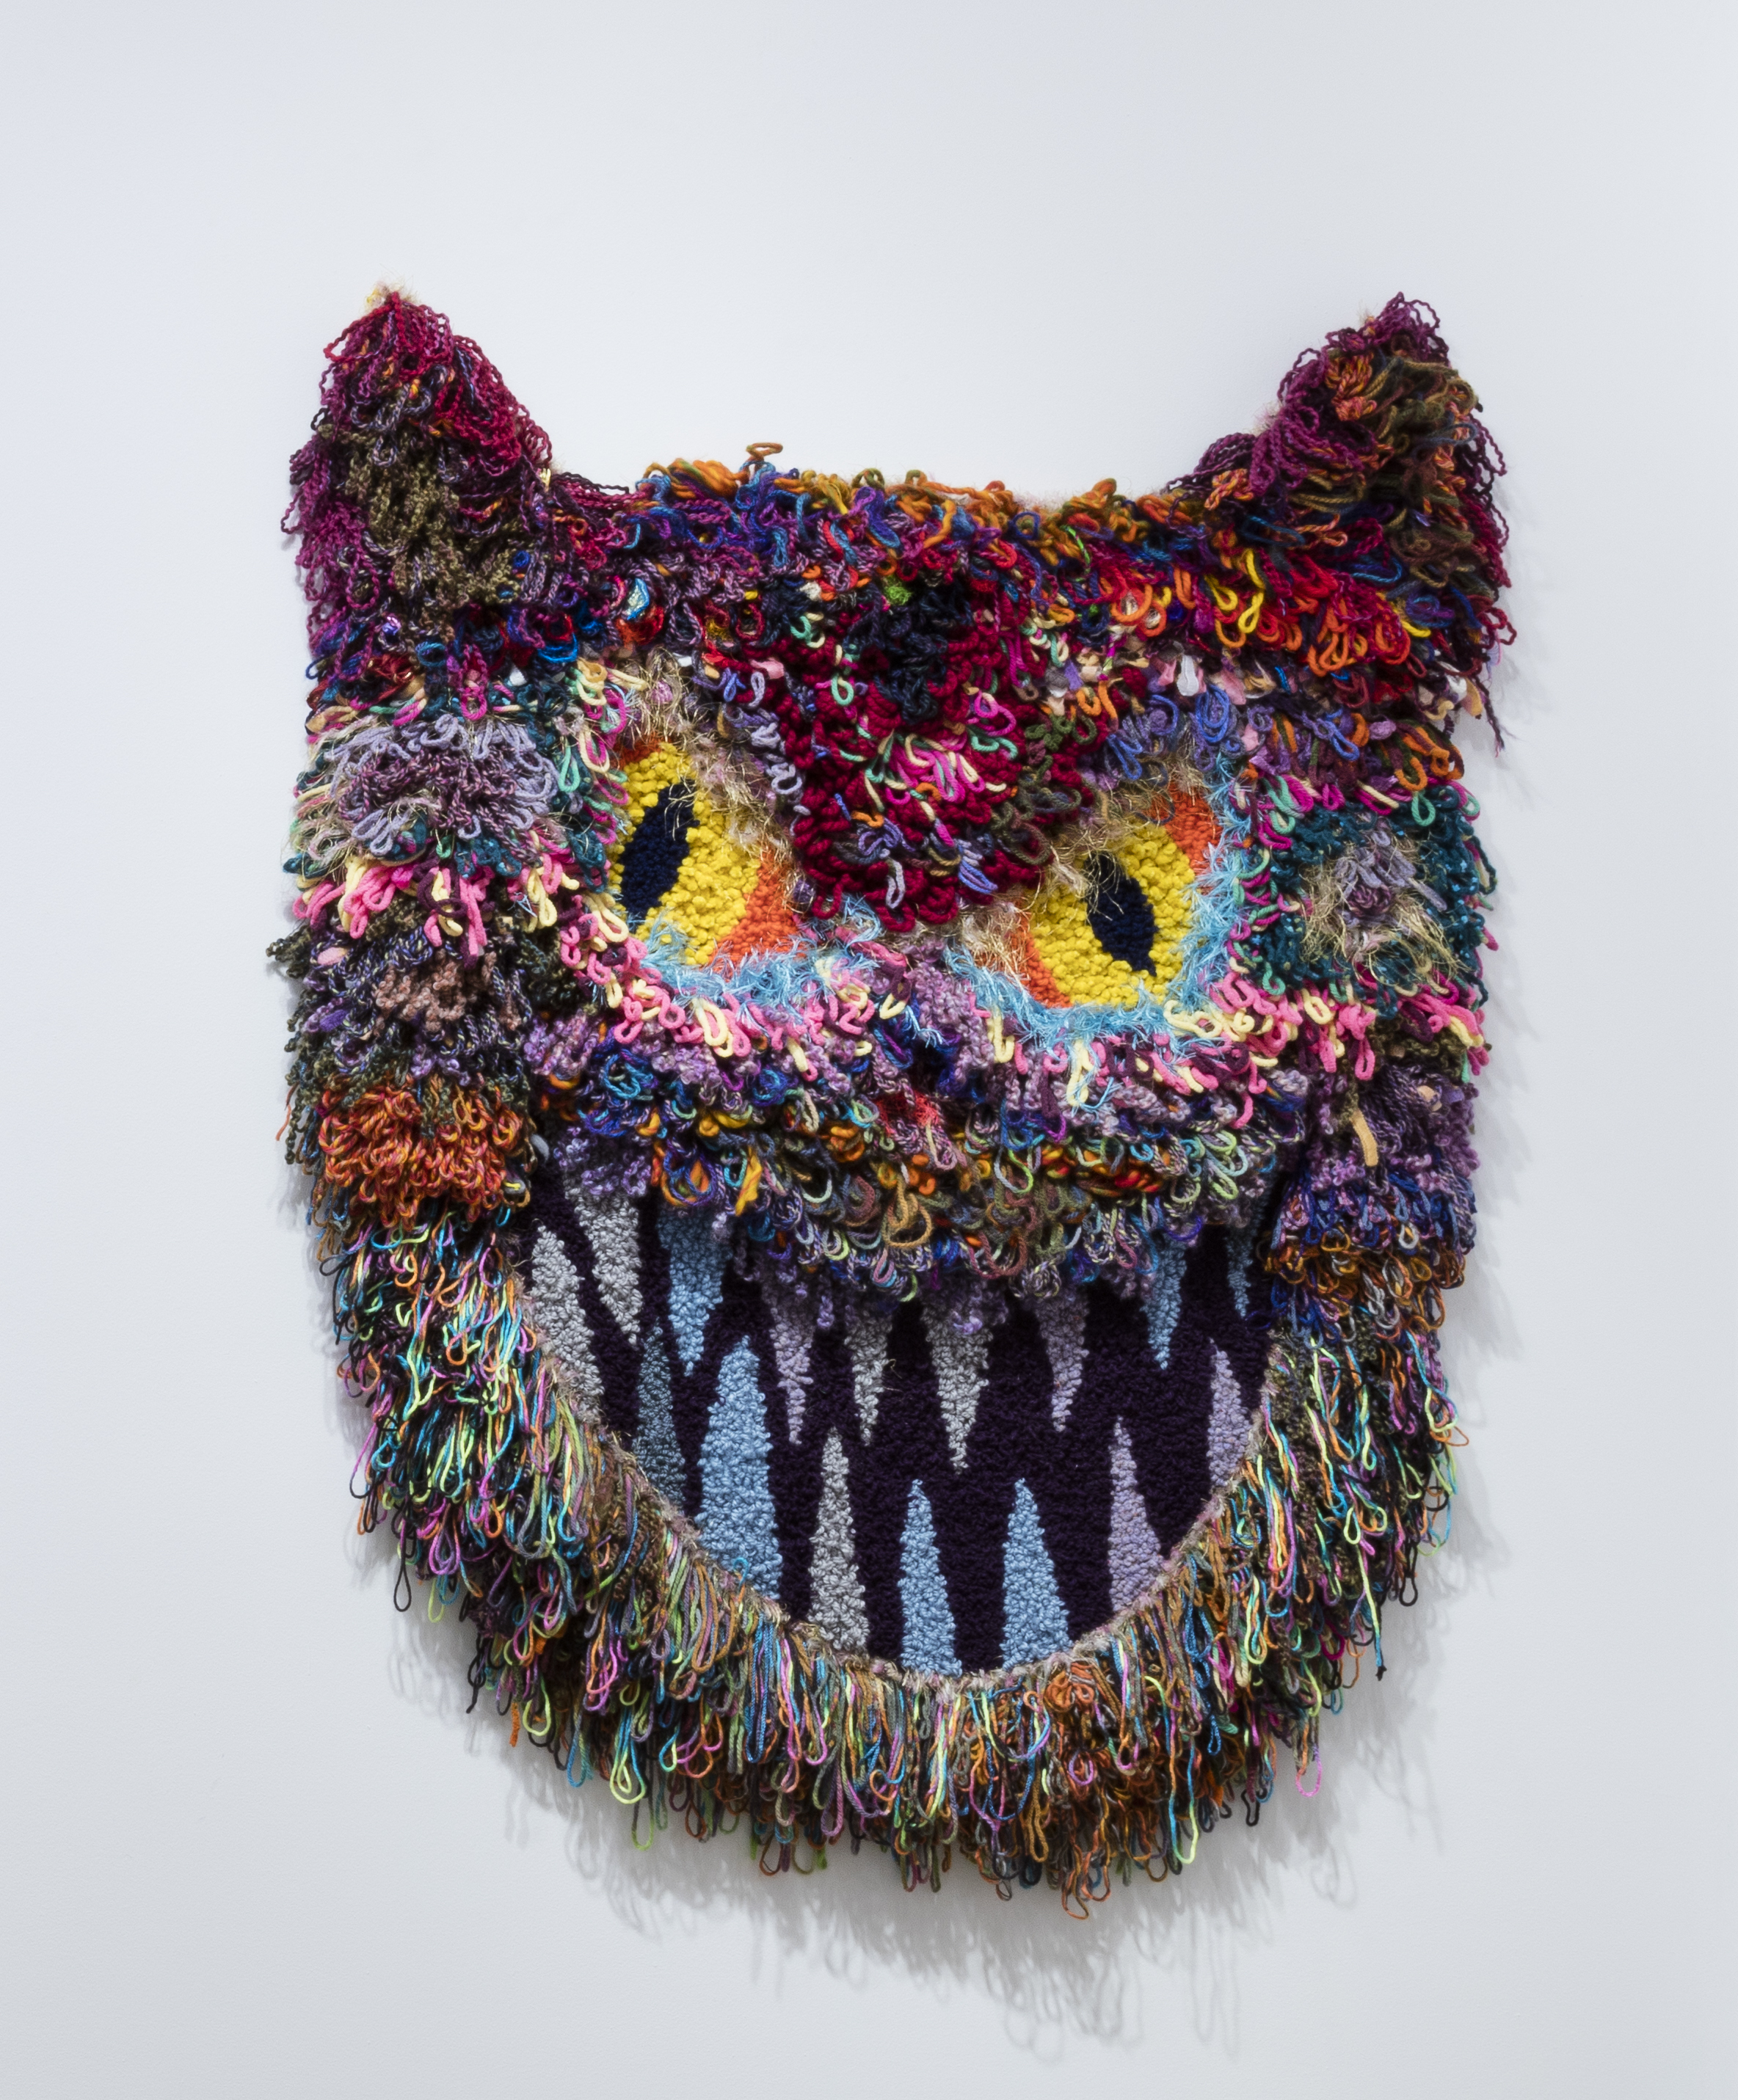 Hannah Epstein. <em>Mouser</em>, 2017. Wool, acrylic, cotton, polyester and burlap, 55 x 41 inches (139.7 x 104.1 cm)